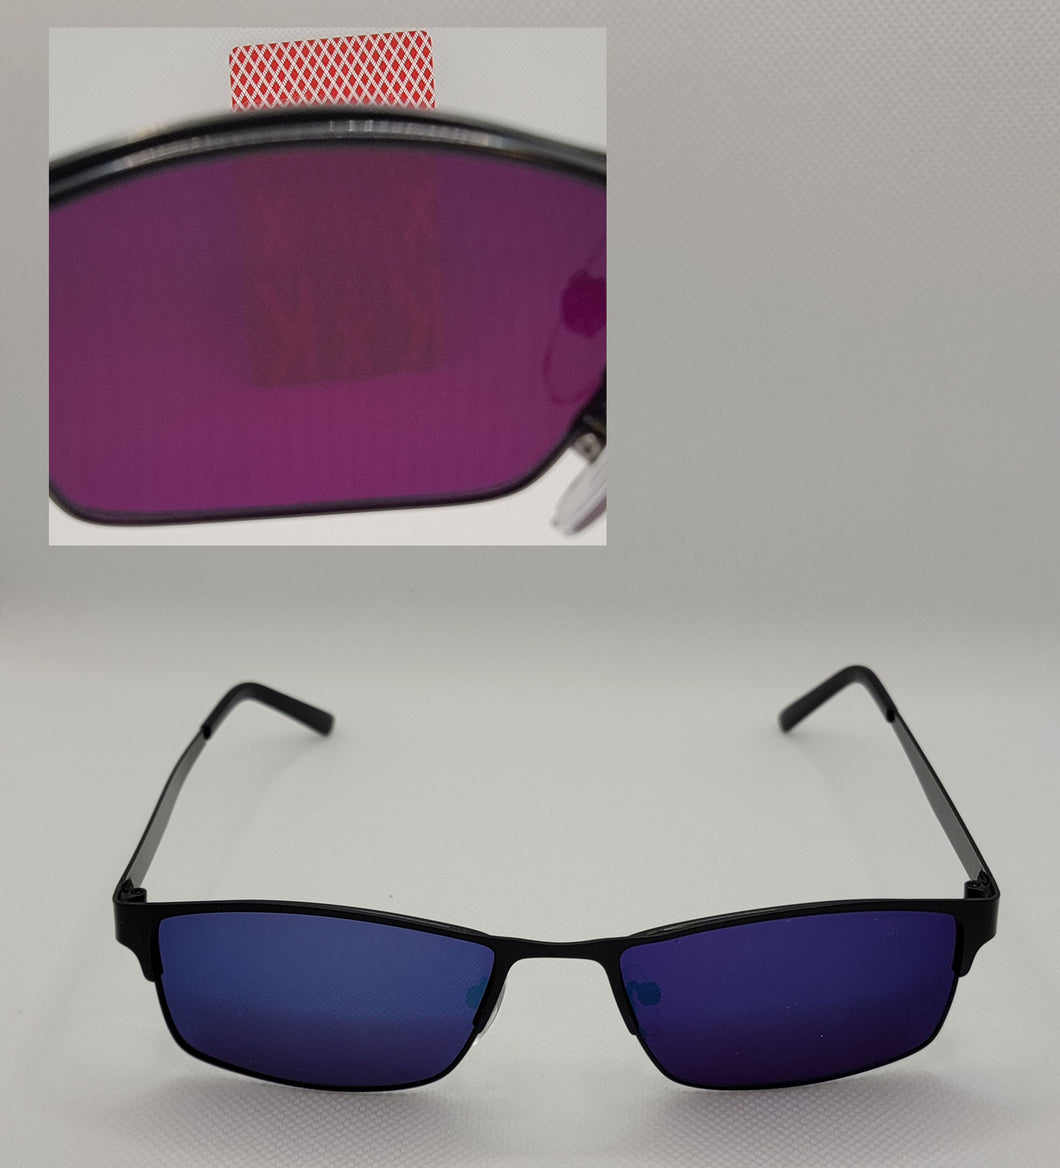 Premium IR Sports Sunglasses & a deck of marked cards